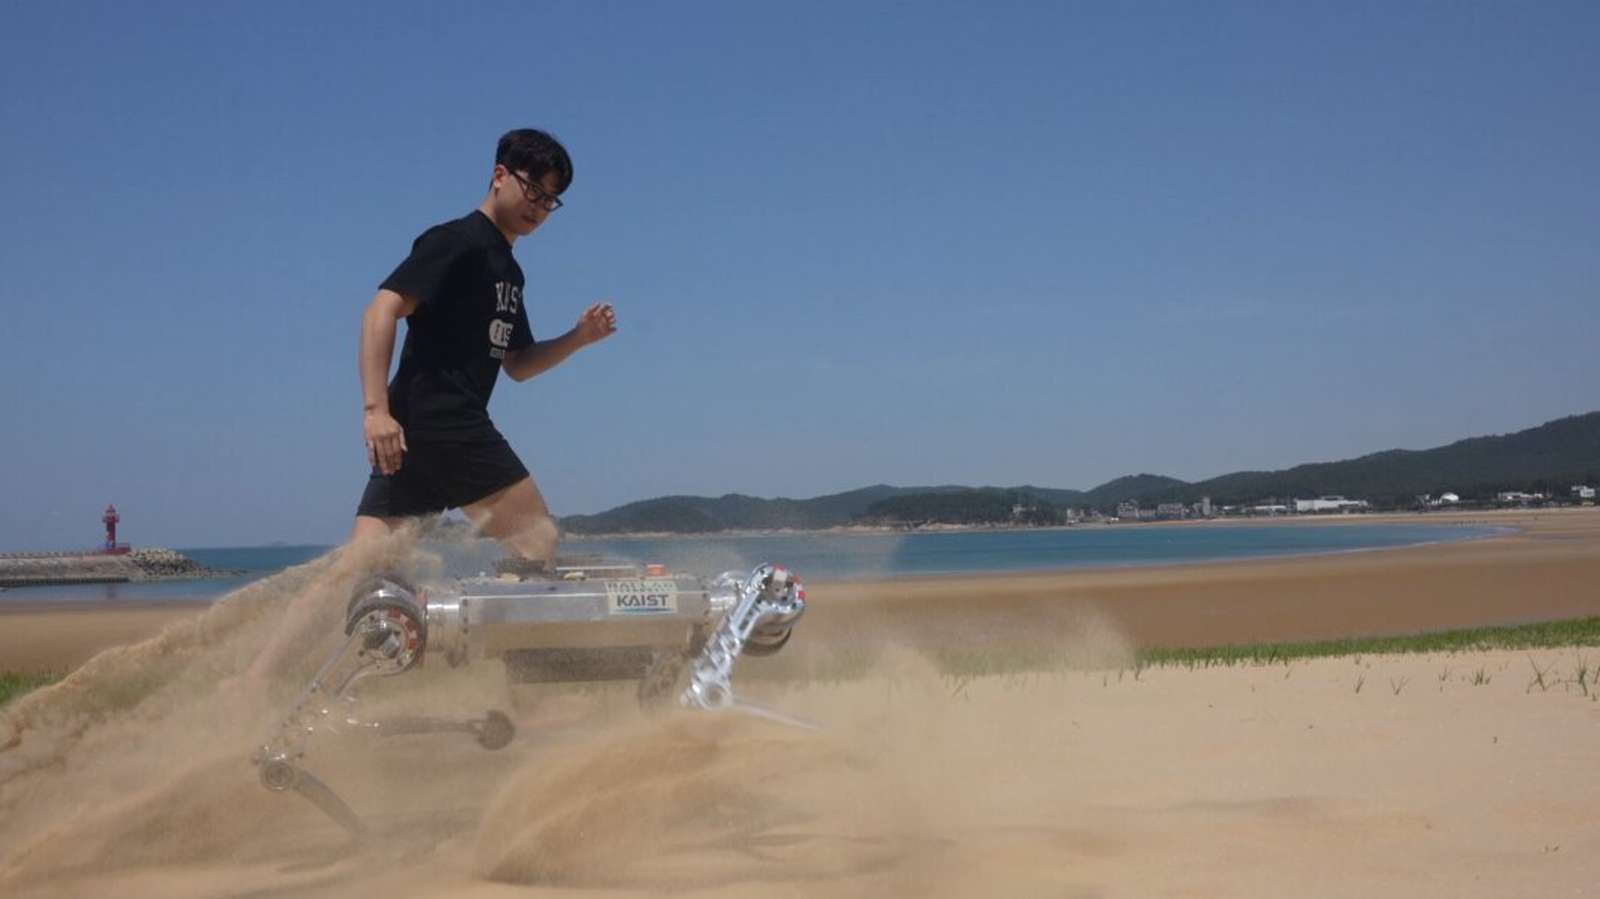 This robot can run at a speed of 11 km/h on the sand!